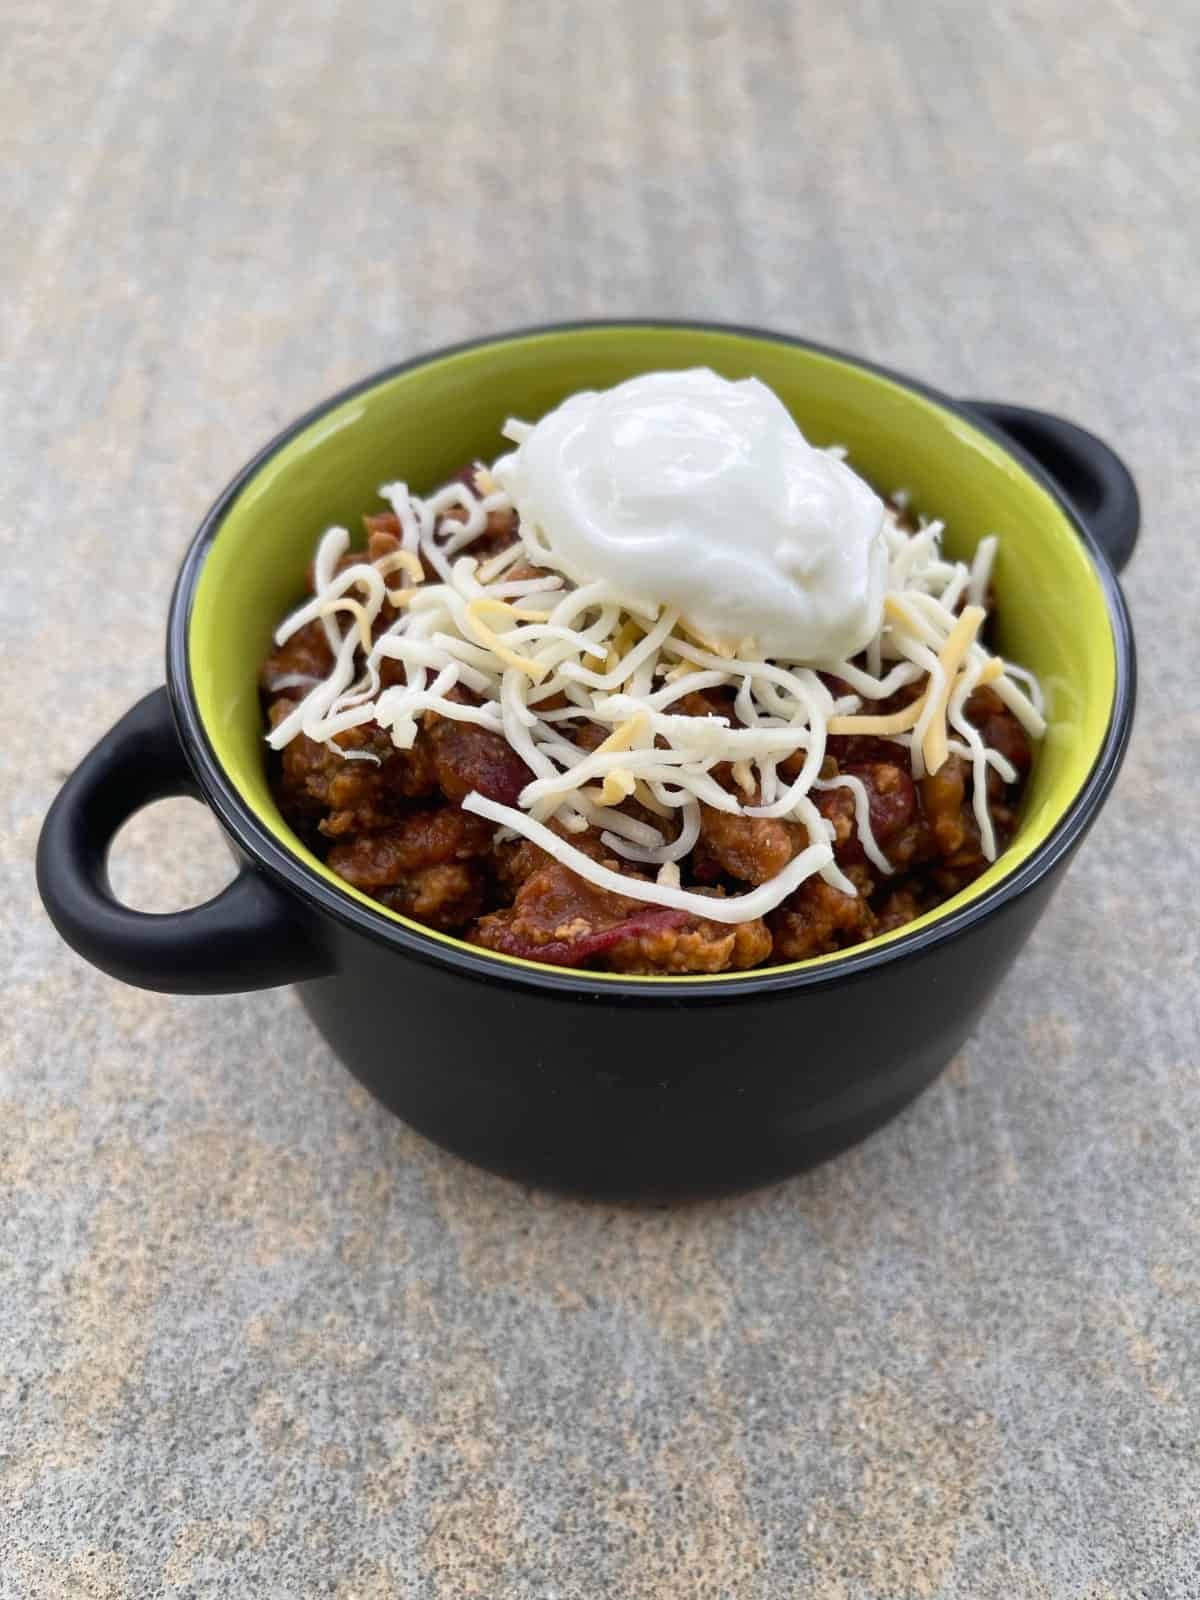 Meatless chili in green bowl with Greek yogurt and shredded cheese.